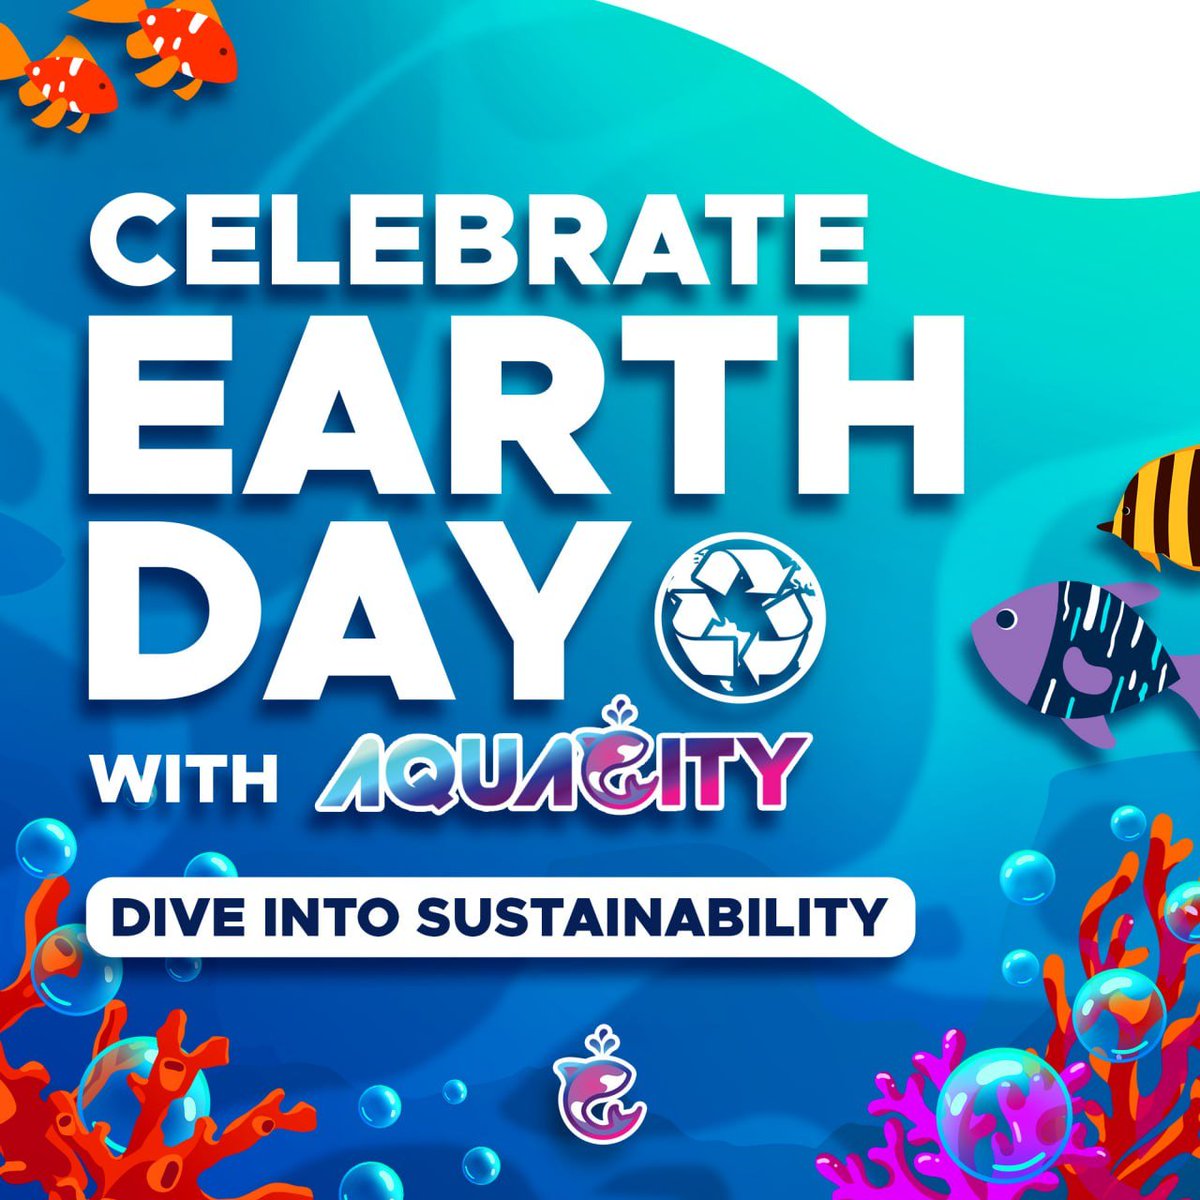 🌍 Happy Earth Day from all of us at Aquacity! 🌊 Let's celebrate our beautiful planet and pledge to protect and preserve its oceans and ecosystems. Today and every day, let's work together to ensure a sustainable future for generations to come.